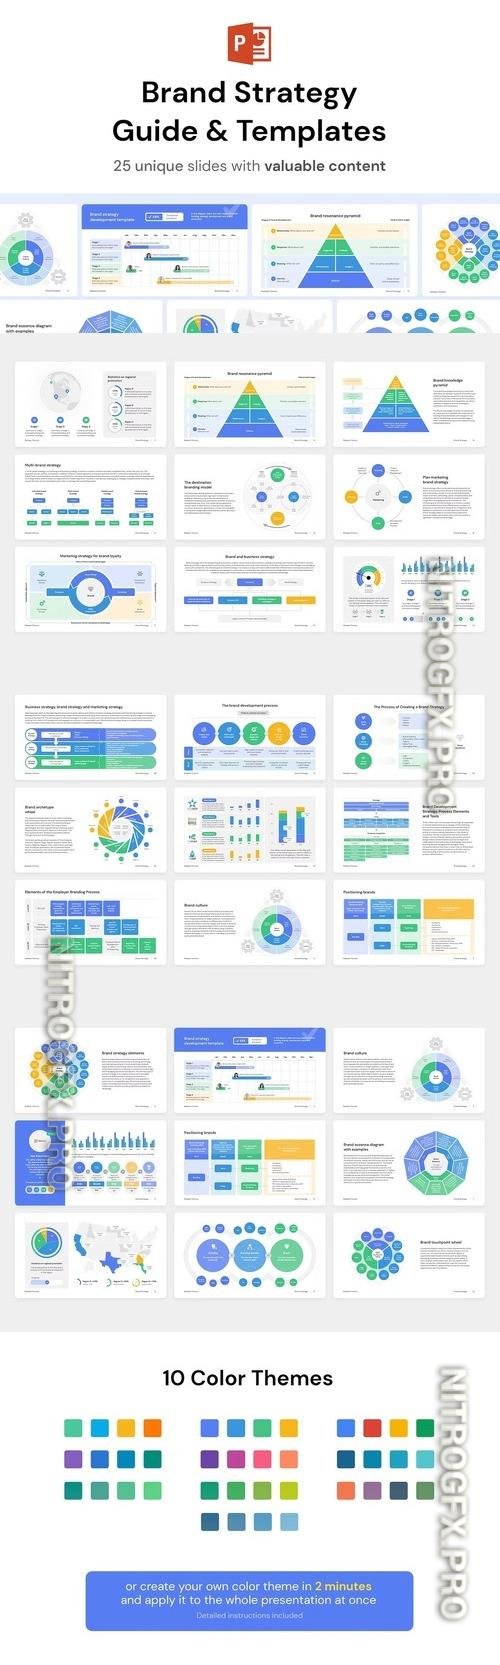 Brand Strategy Guide and Templates for PowerPoint